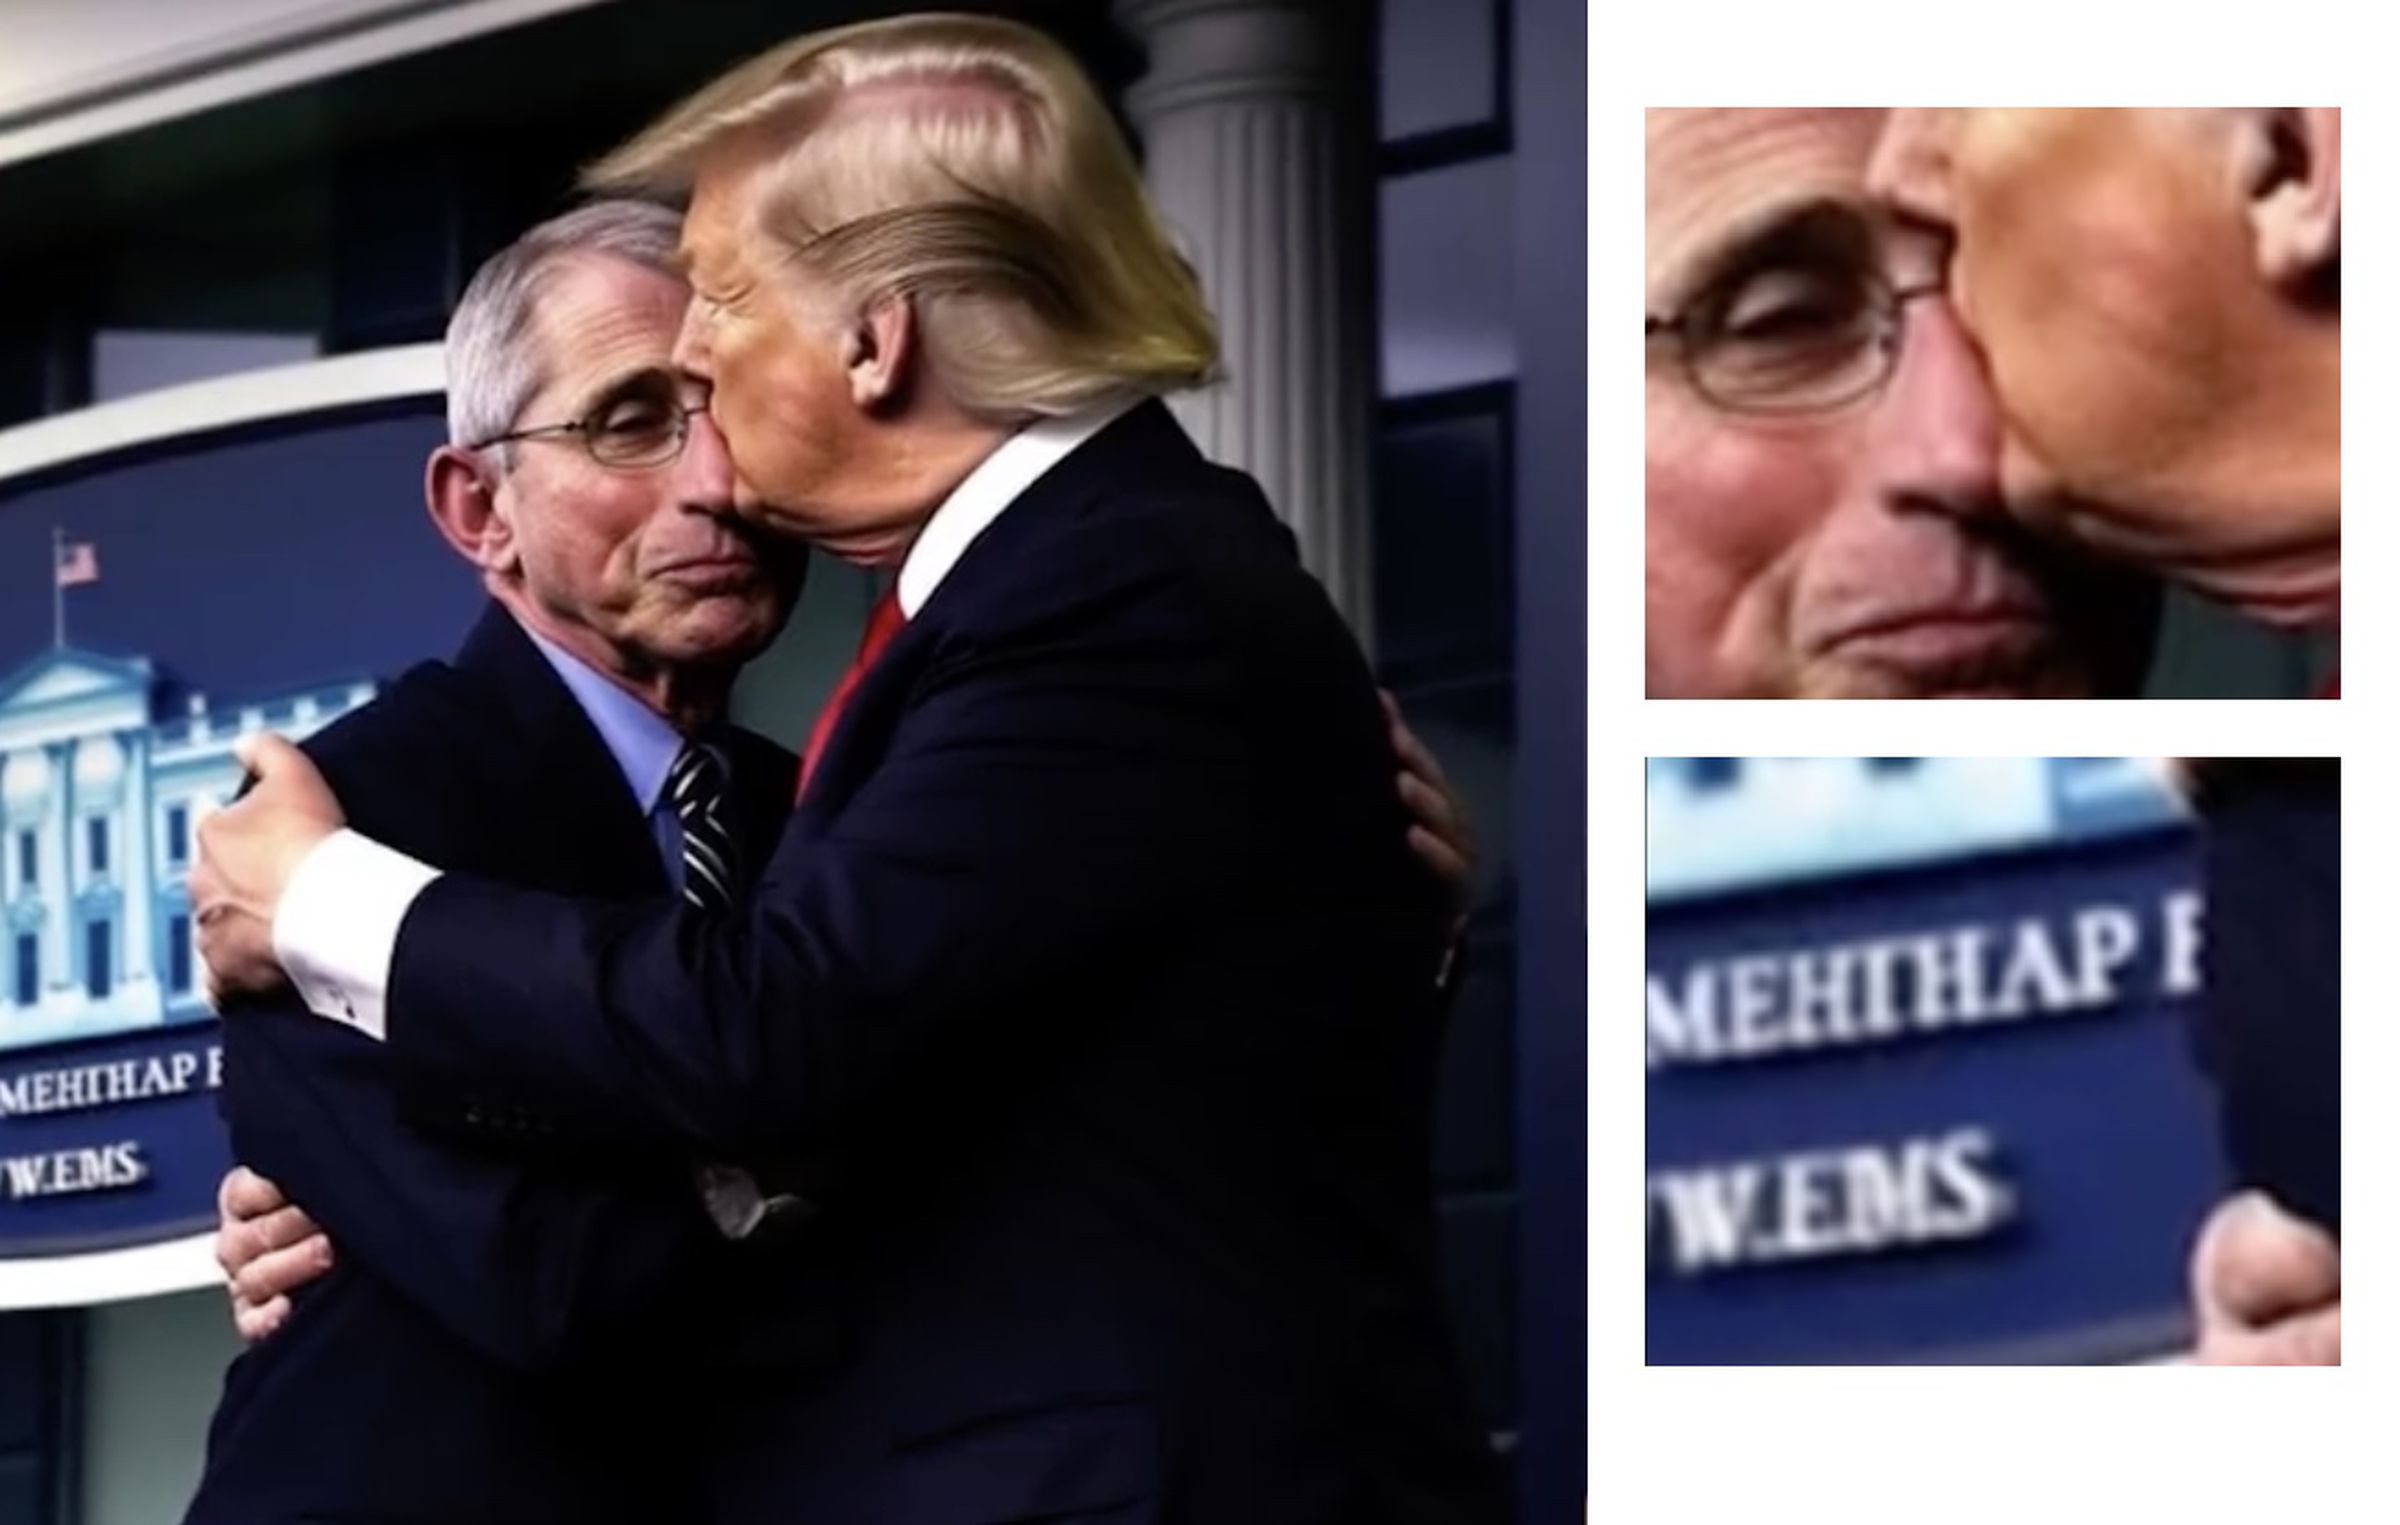 A screenshot supposedly showing Trump and Fauci embracing with zoomed segments showing distortions. 